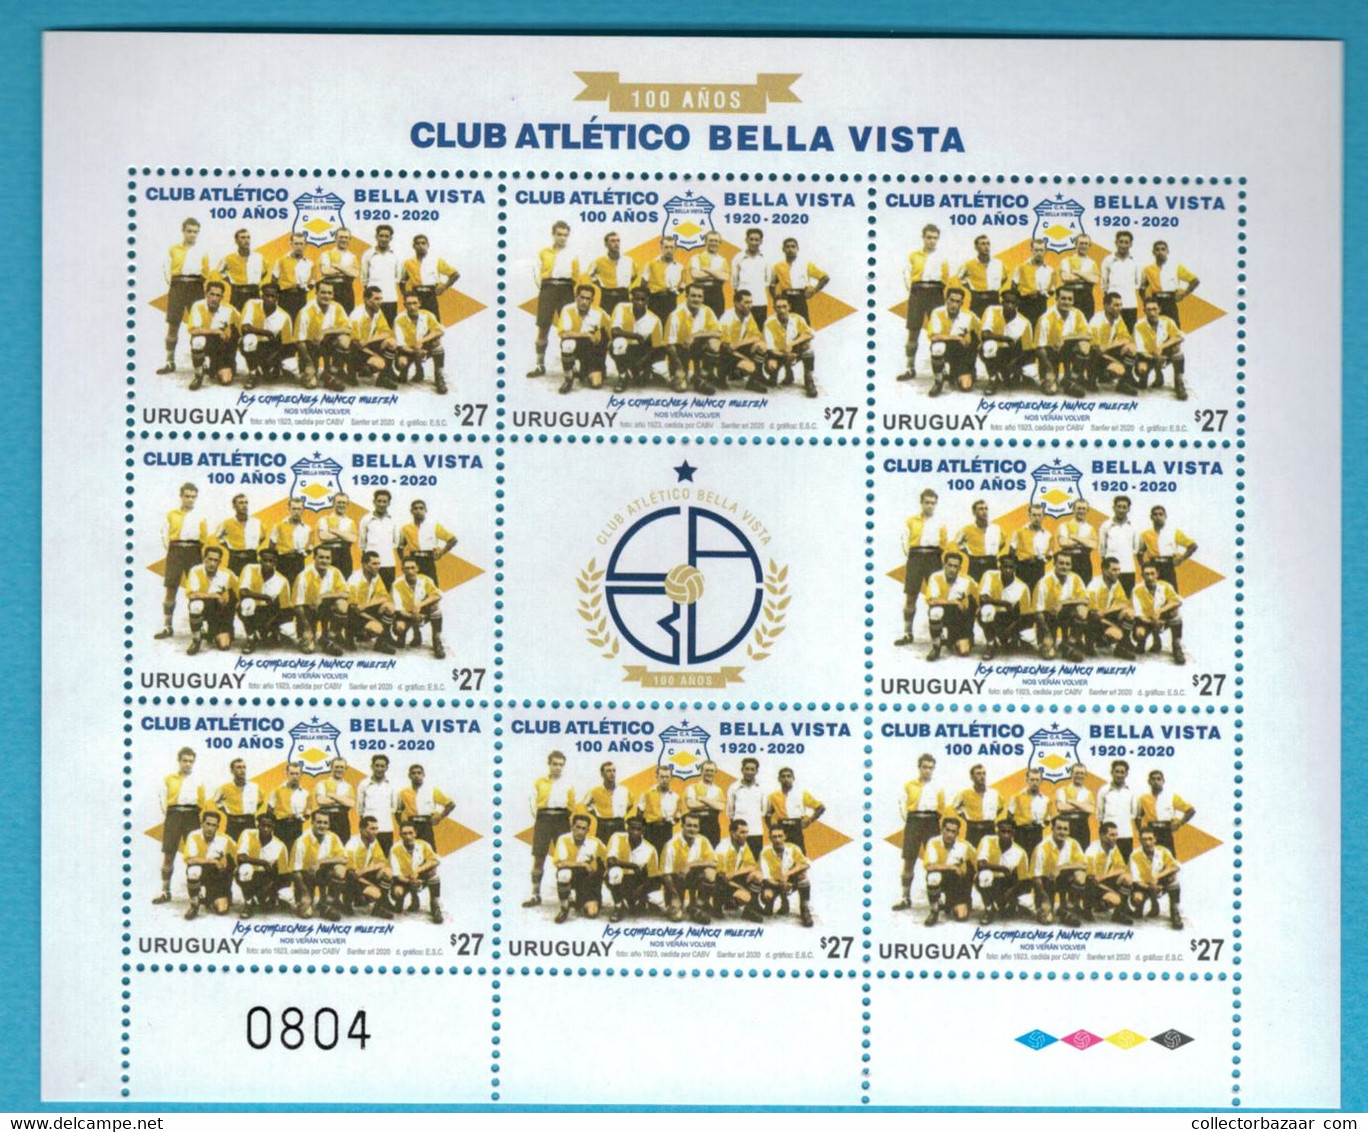 Uruguay 2020 Soccer Football Club MNH ** Sheetlet  World With Some Cup Champions Of 1930 Like Nassazzi - 1930 – Uruguay